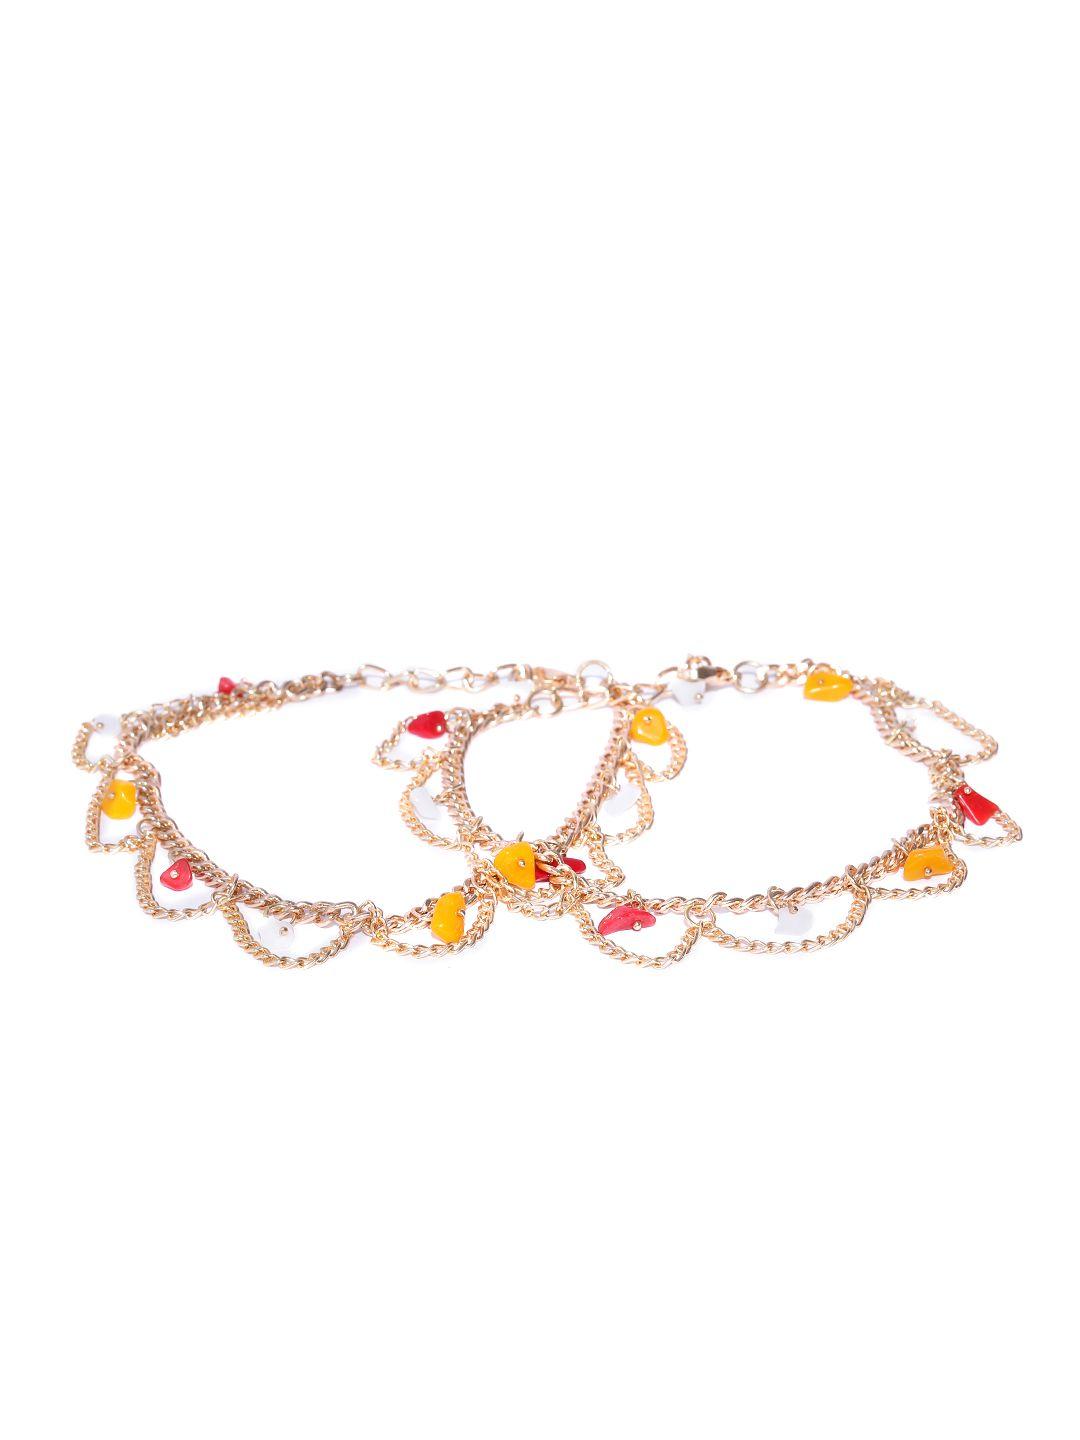 blueberry set of 2 gold-plated layered beaded anklets